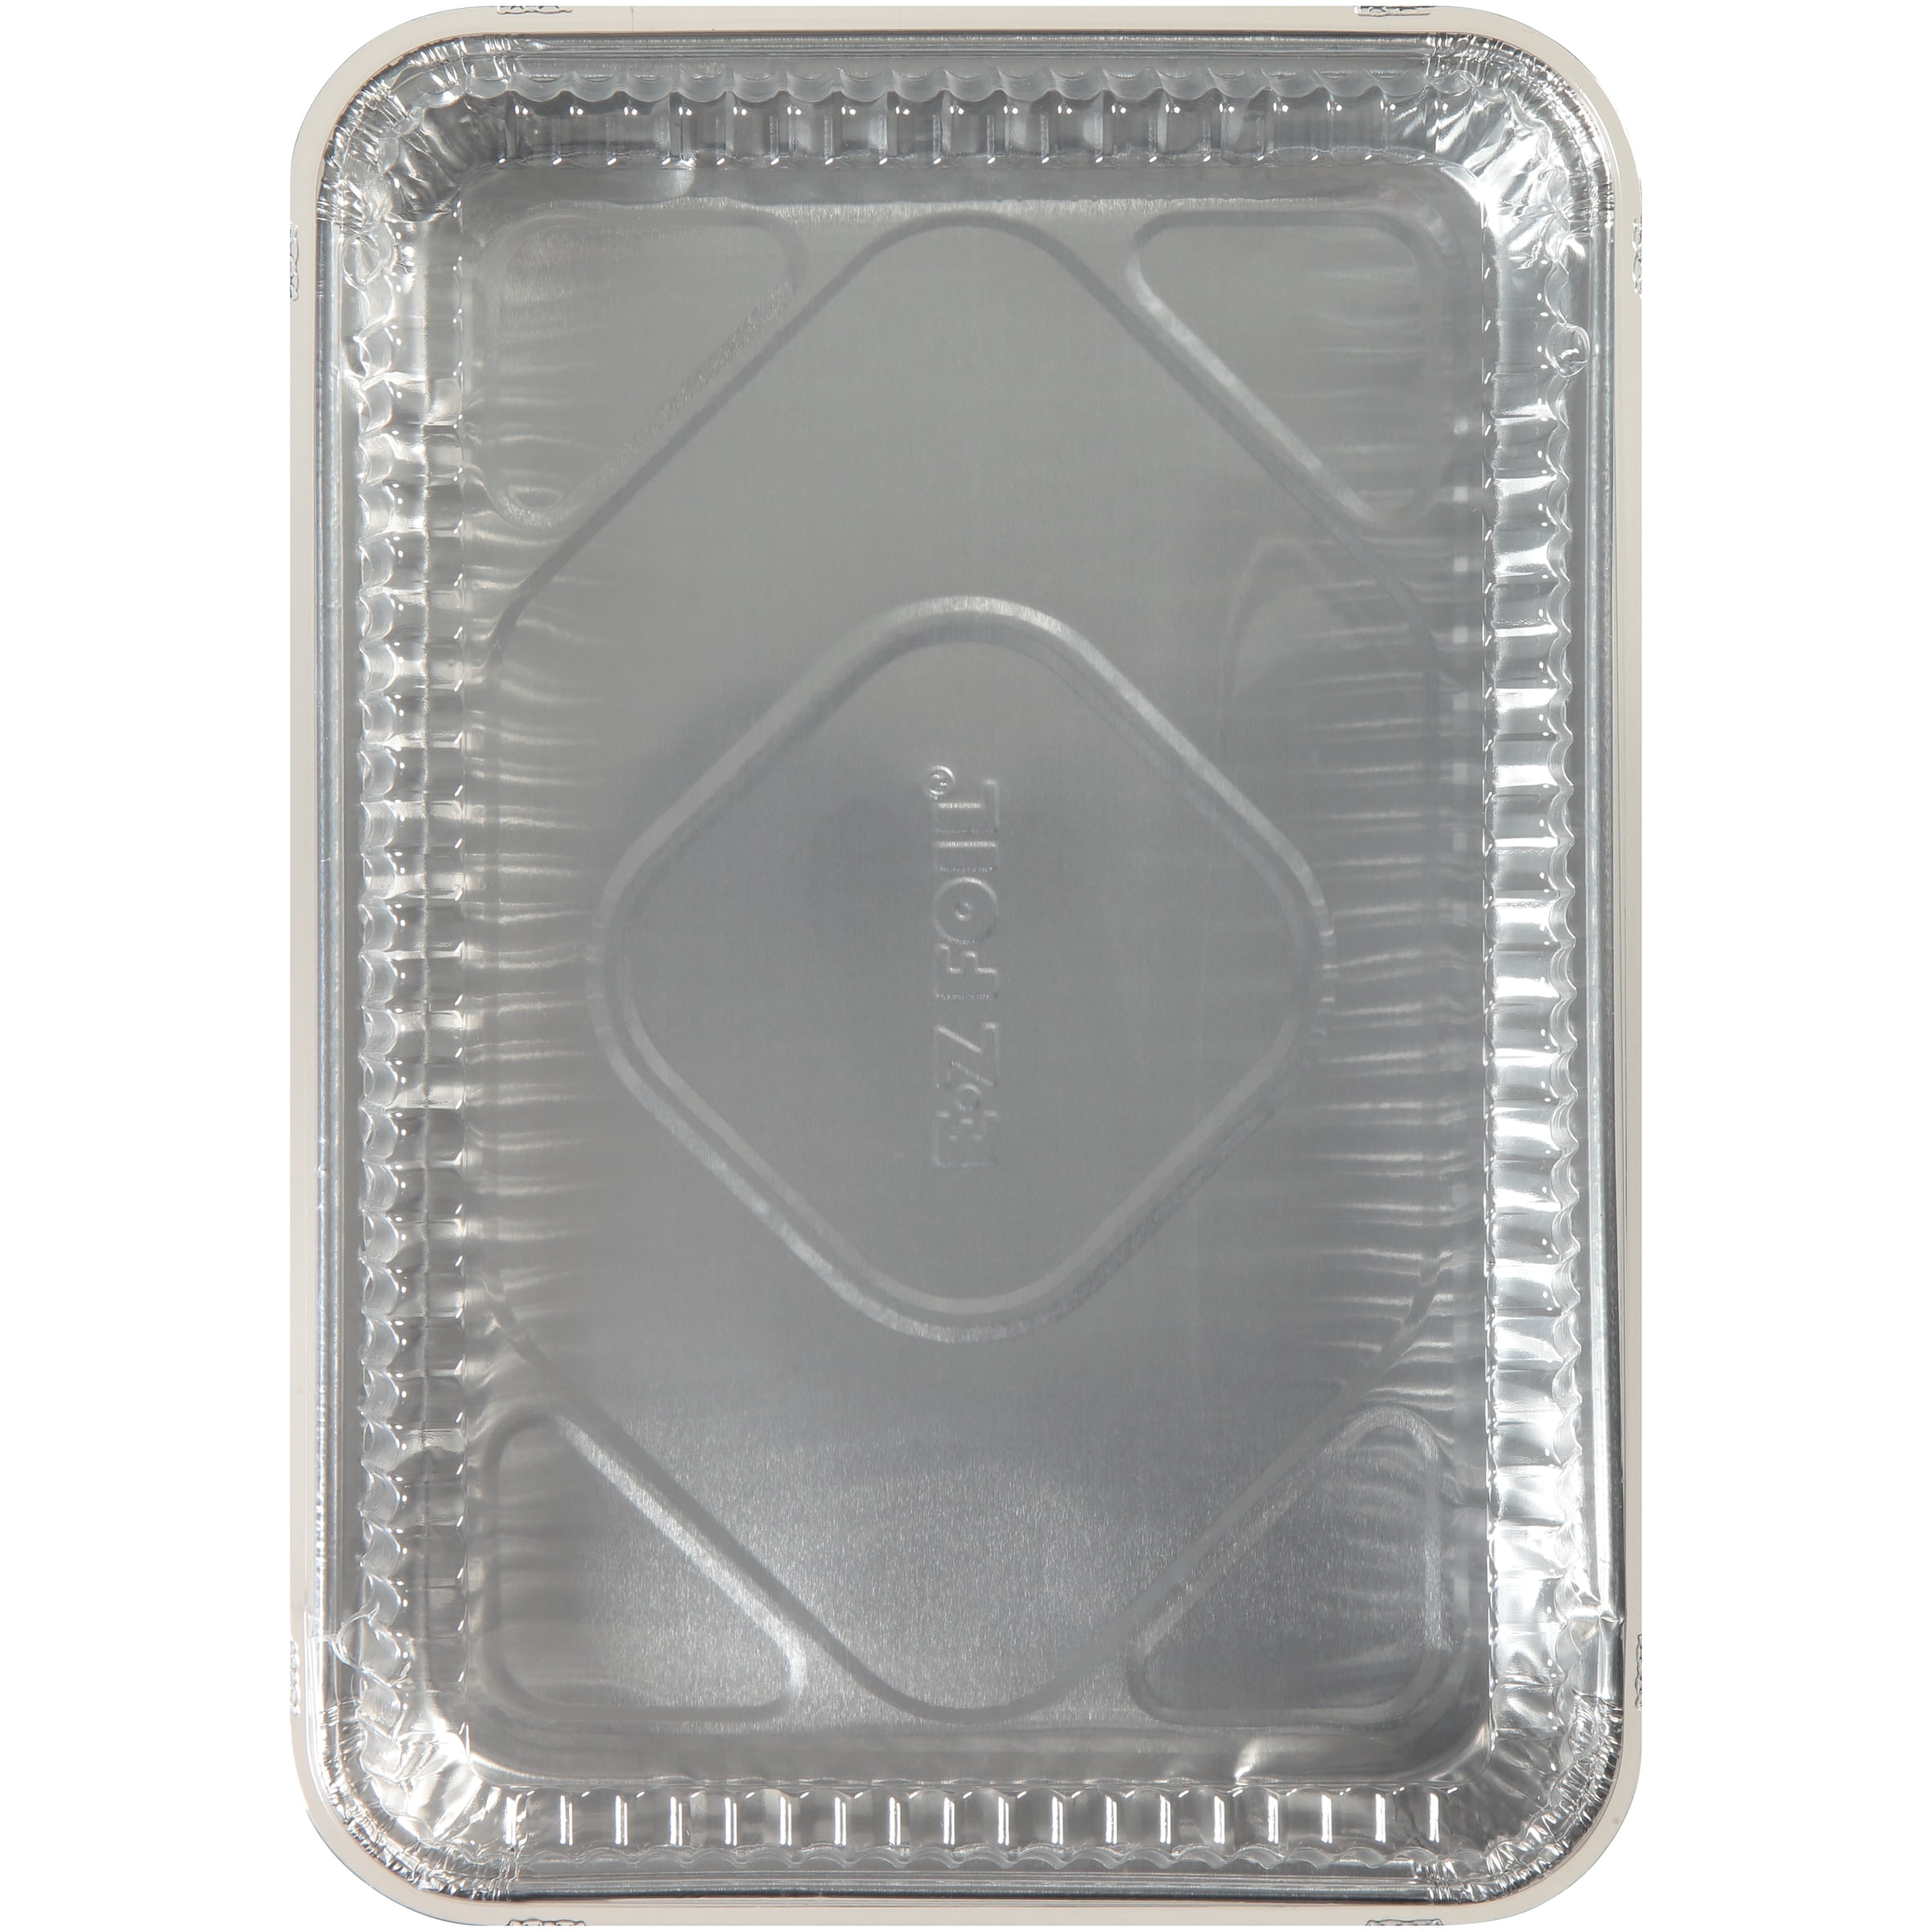 Wholesale Foil Cake Pan 13 x 9 x 2 with Lid - GLW